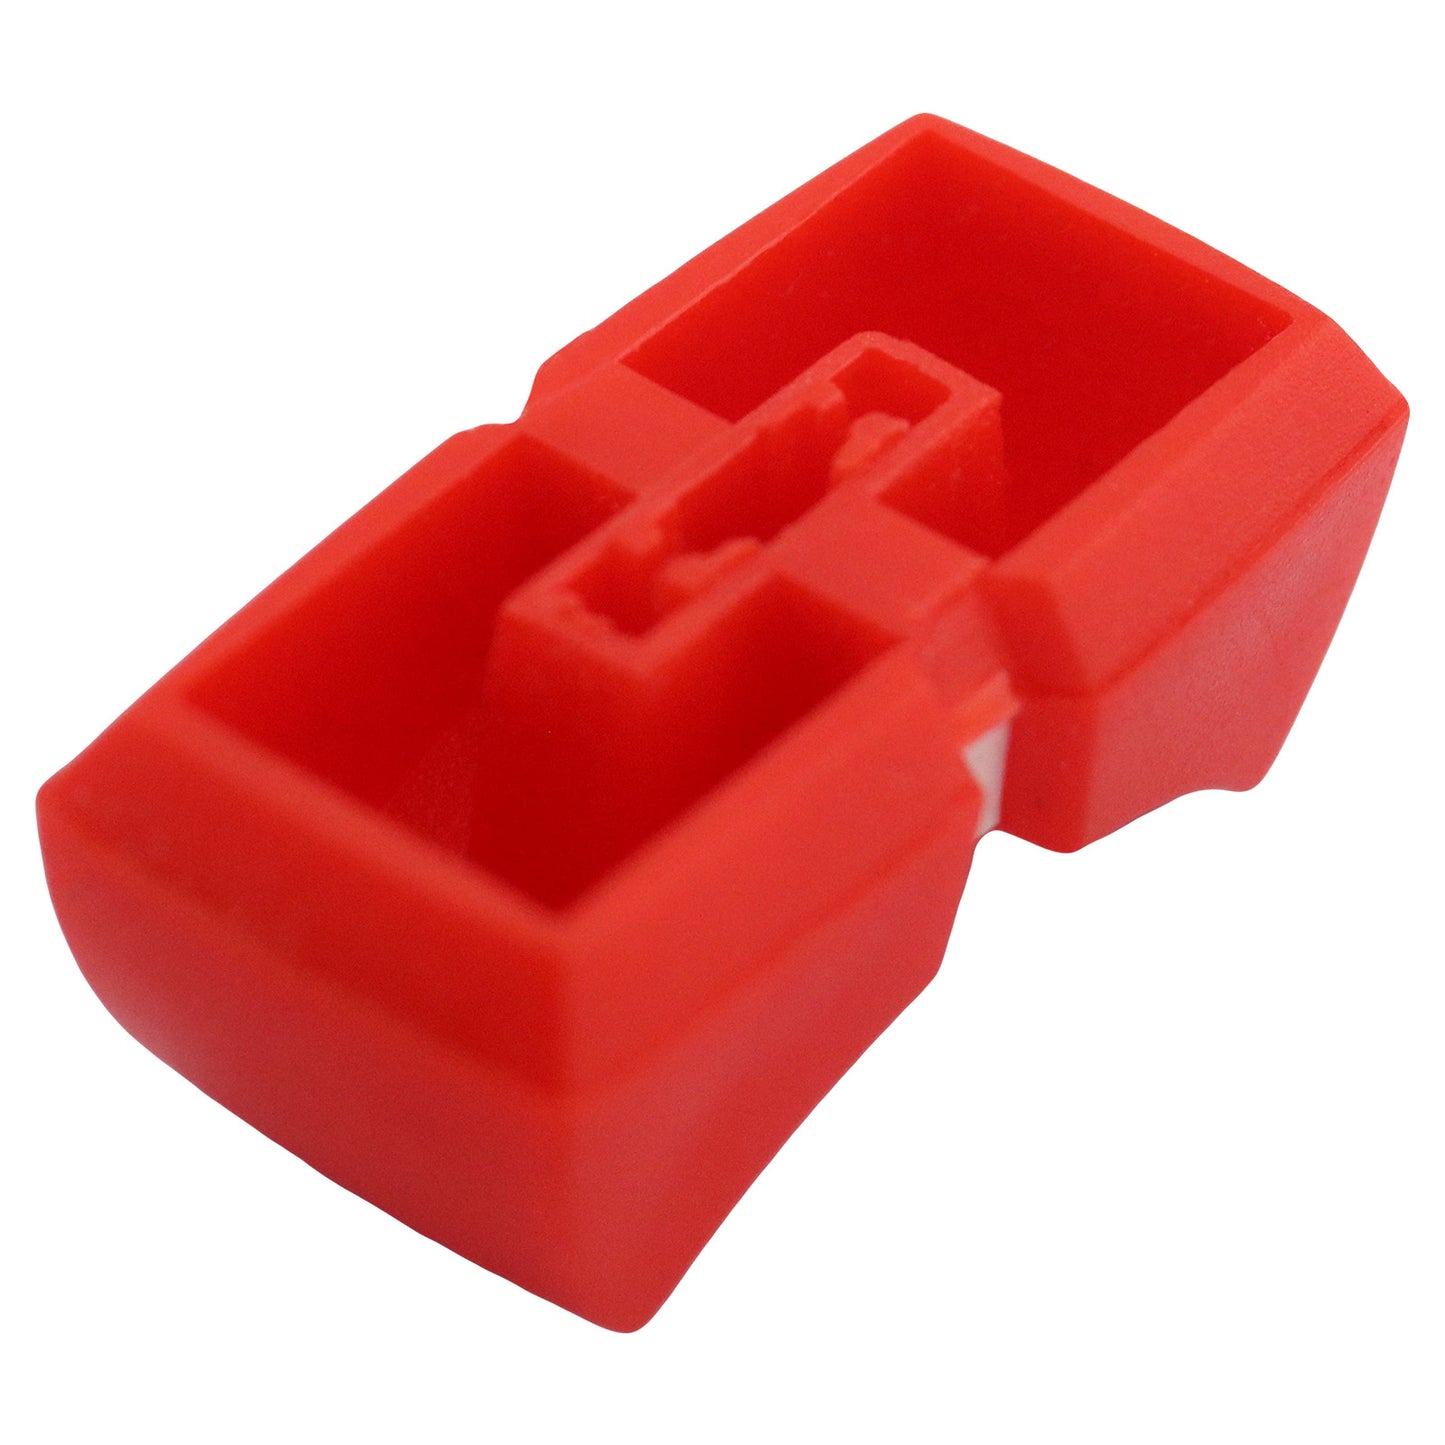 4mm Colour Body Linear Slider / Fader Caps With Large Position Indicator